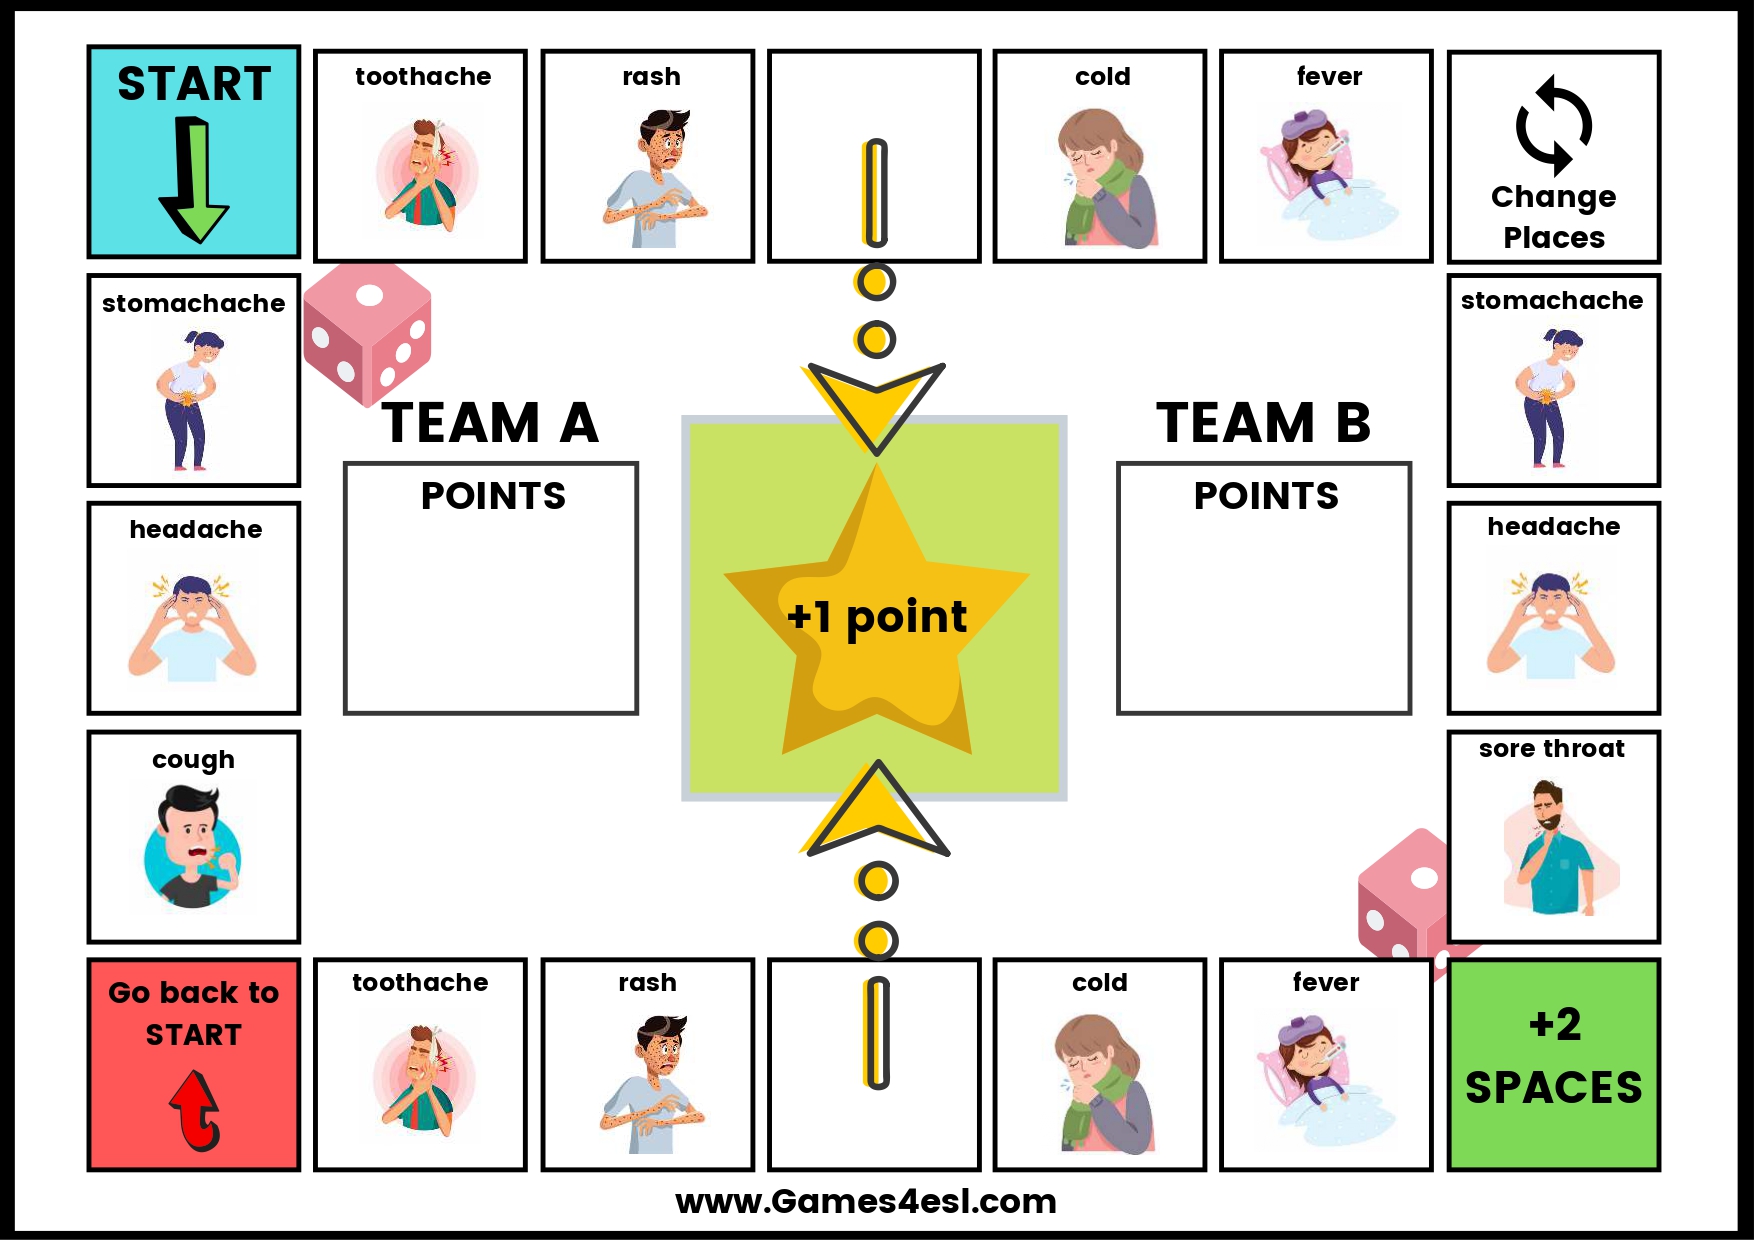 A printable board game for teaching health and sickness vocabulary in English.